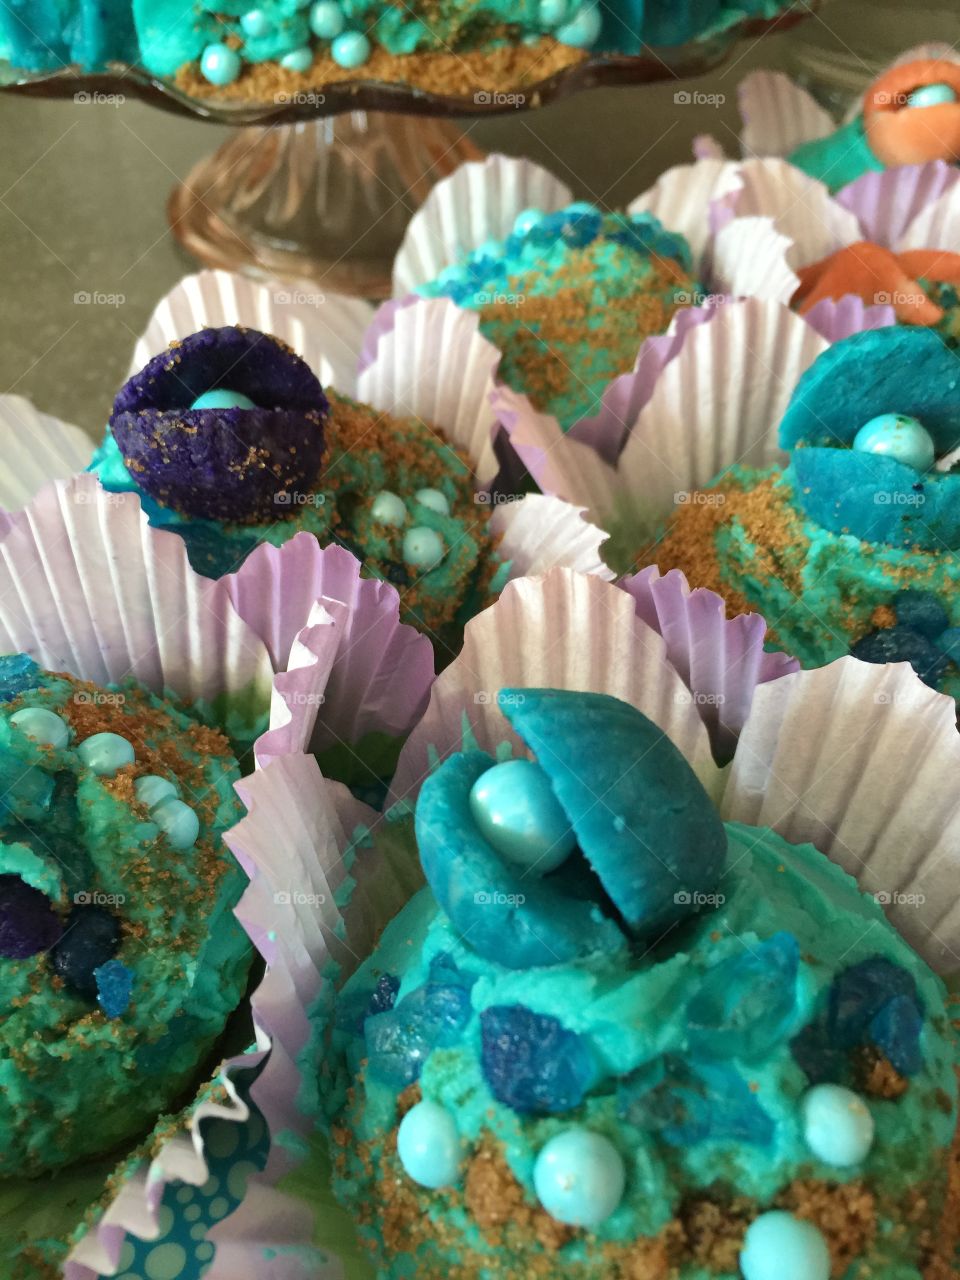 Cupcakes fit for a Mermaid